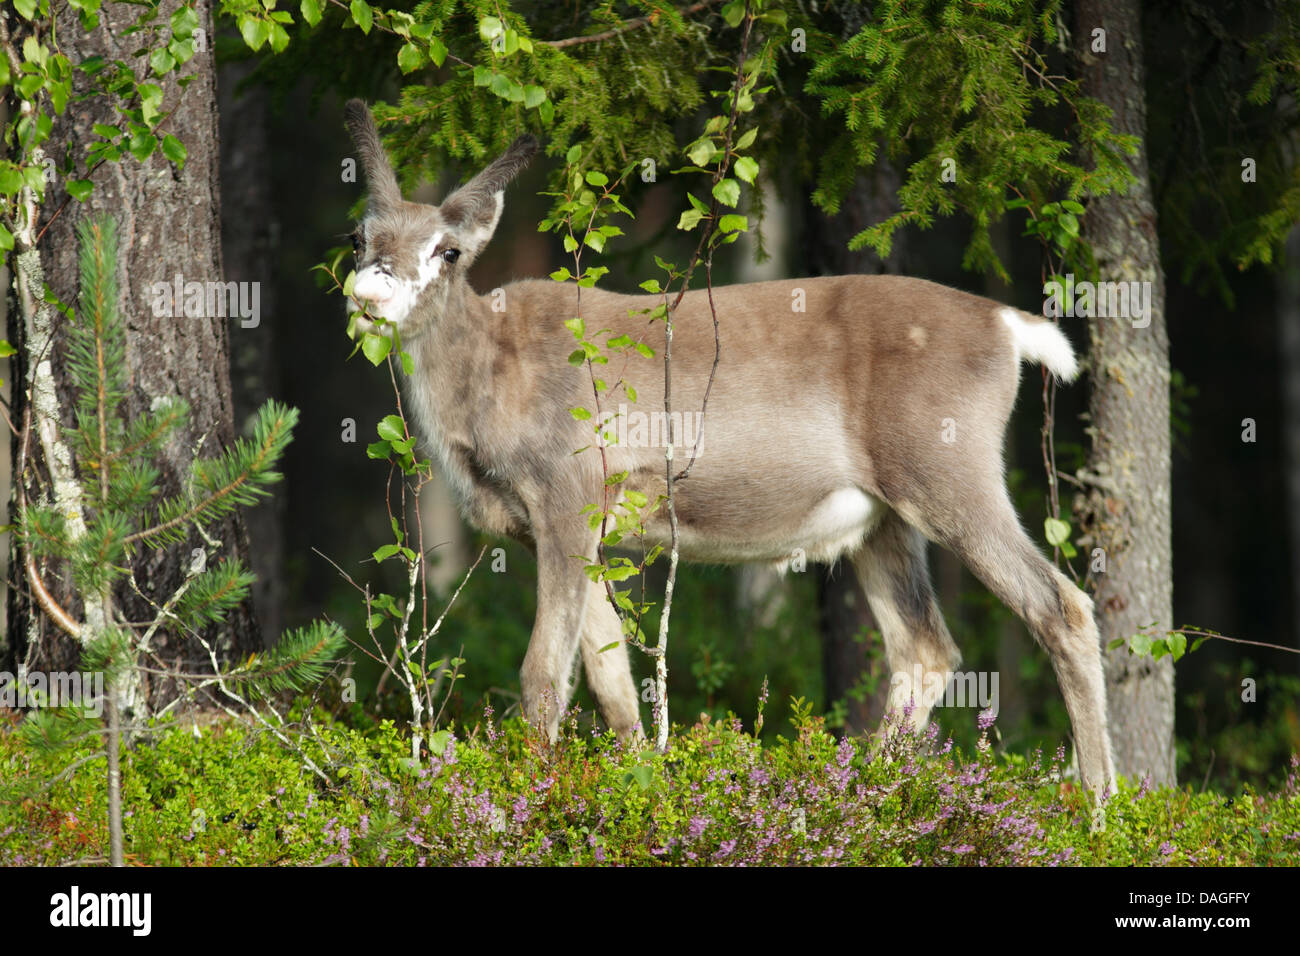 Young reindeer (Rangifer tarandus) browsing at the edge of a forest Stock Photo